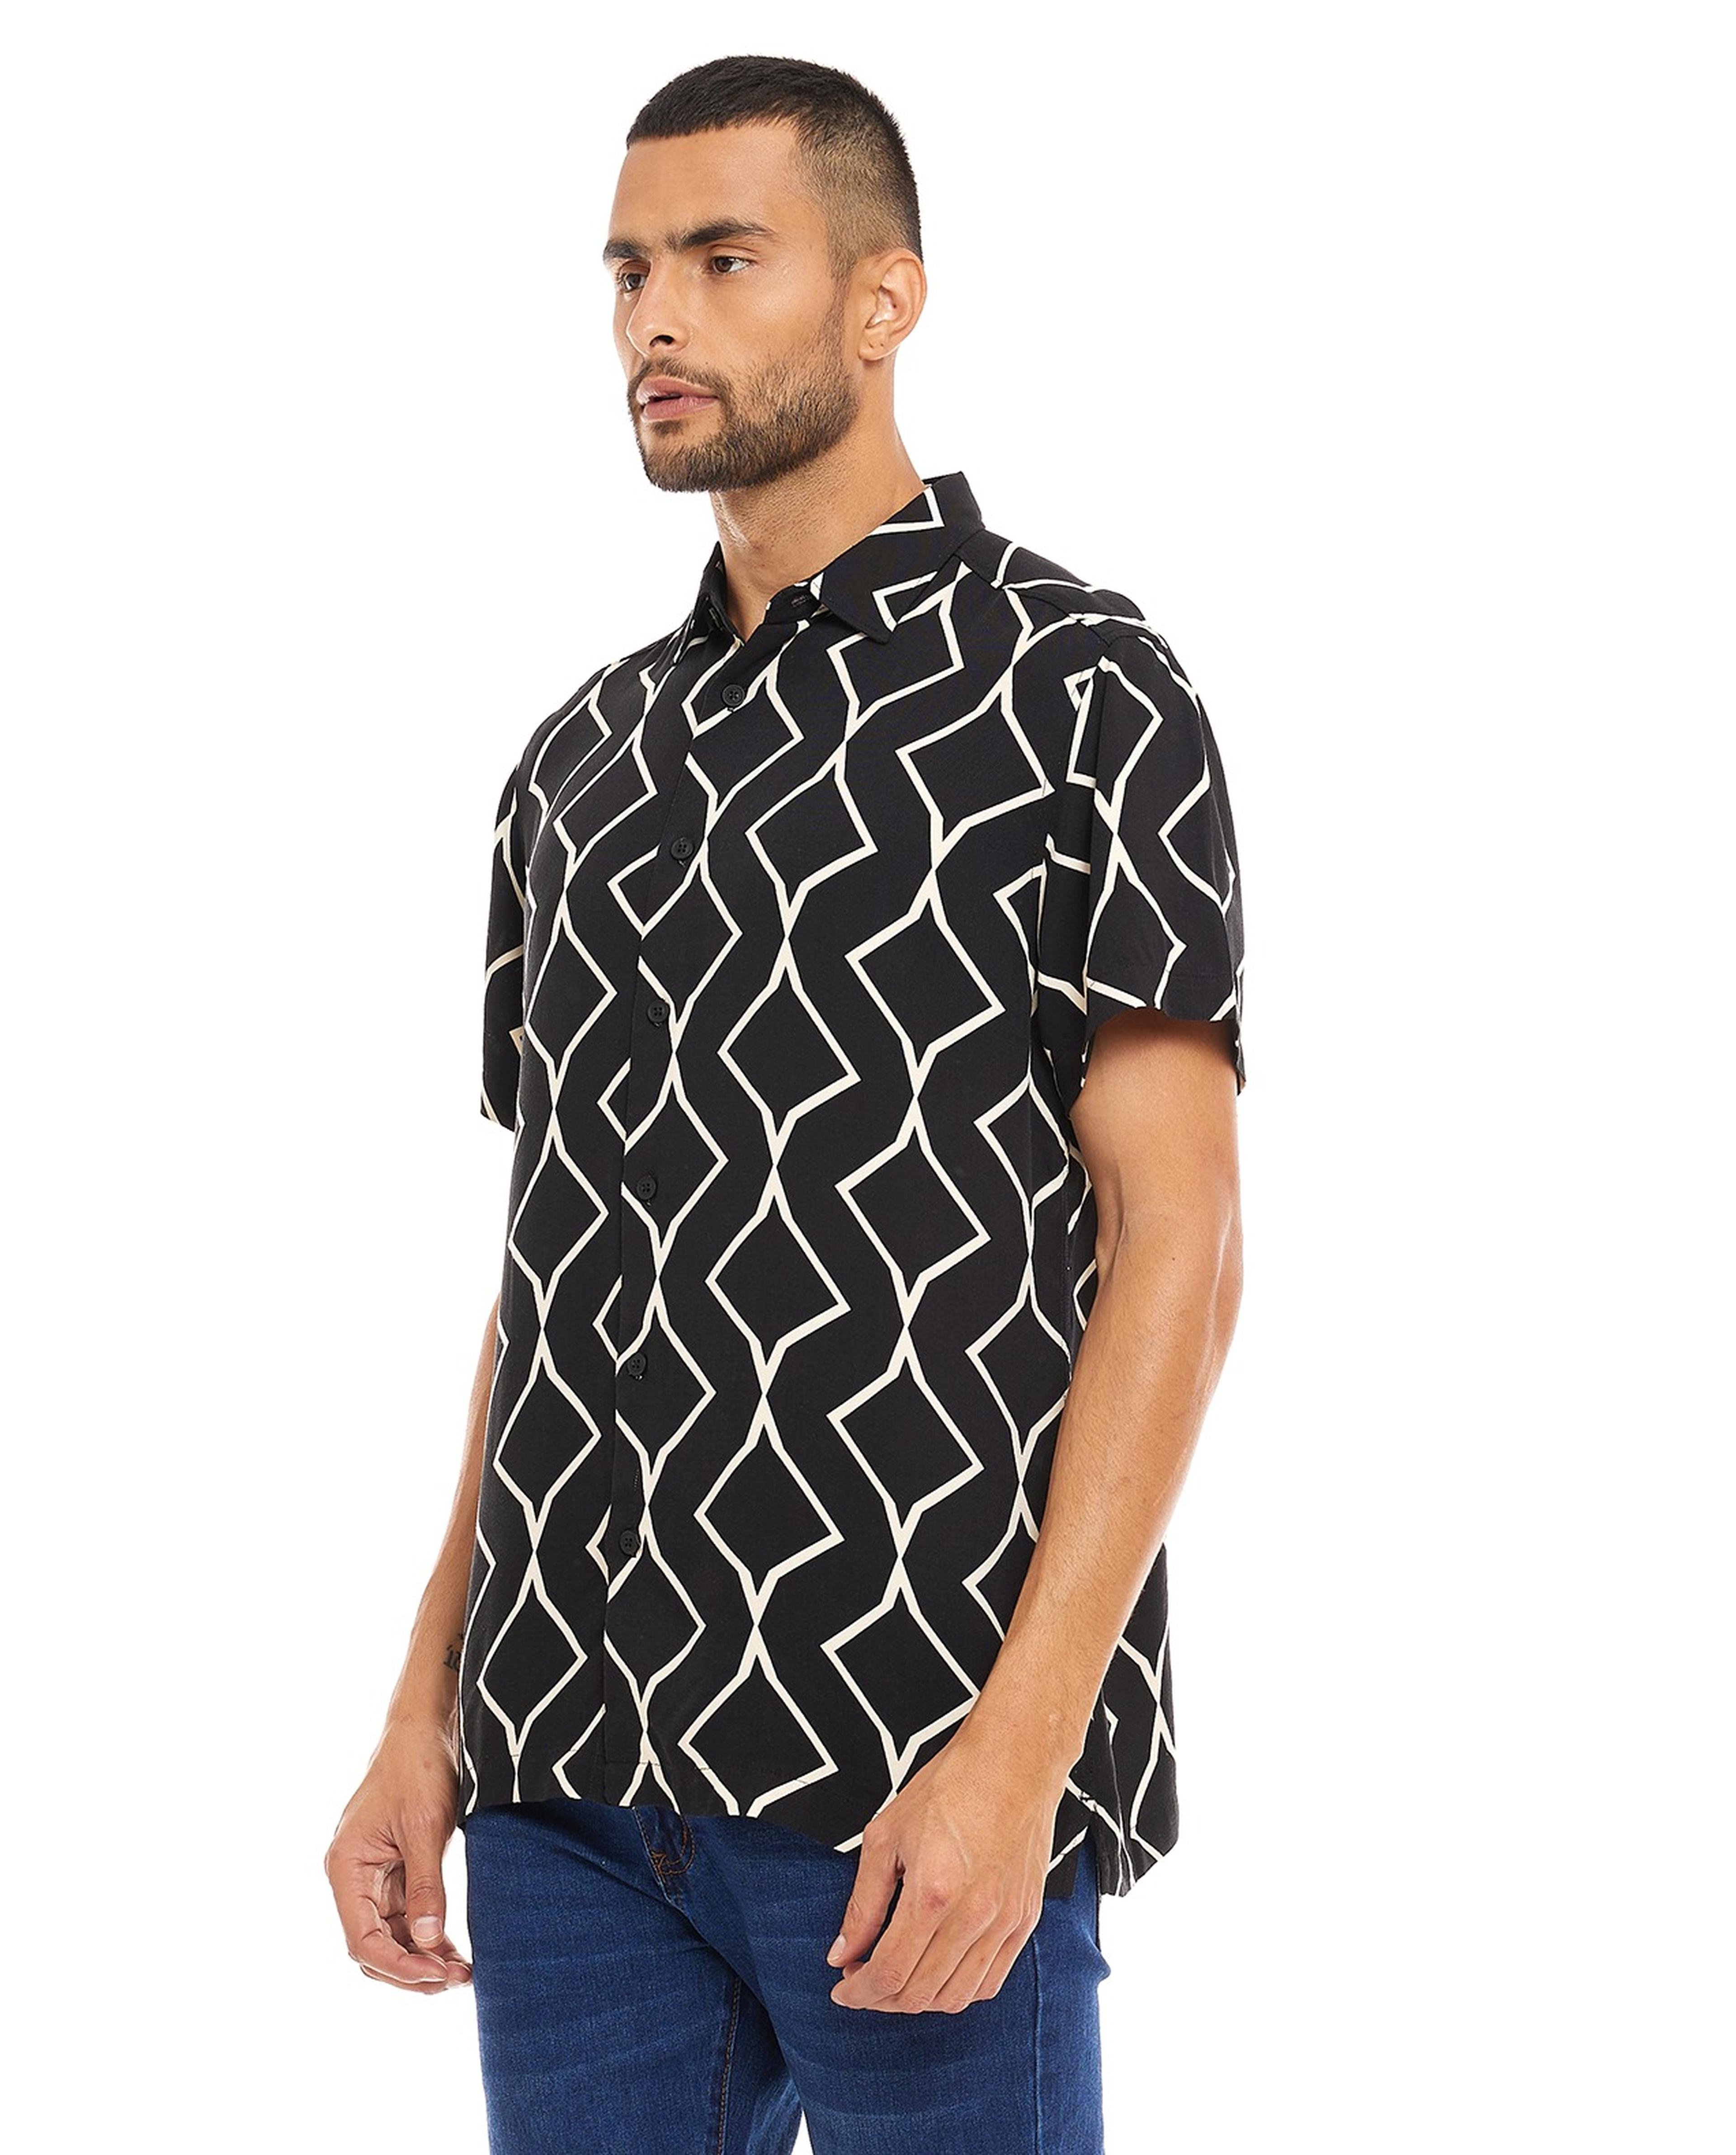 Patterned Shirt with Spread Collar and Short Sleeves